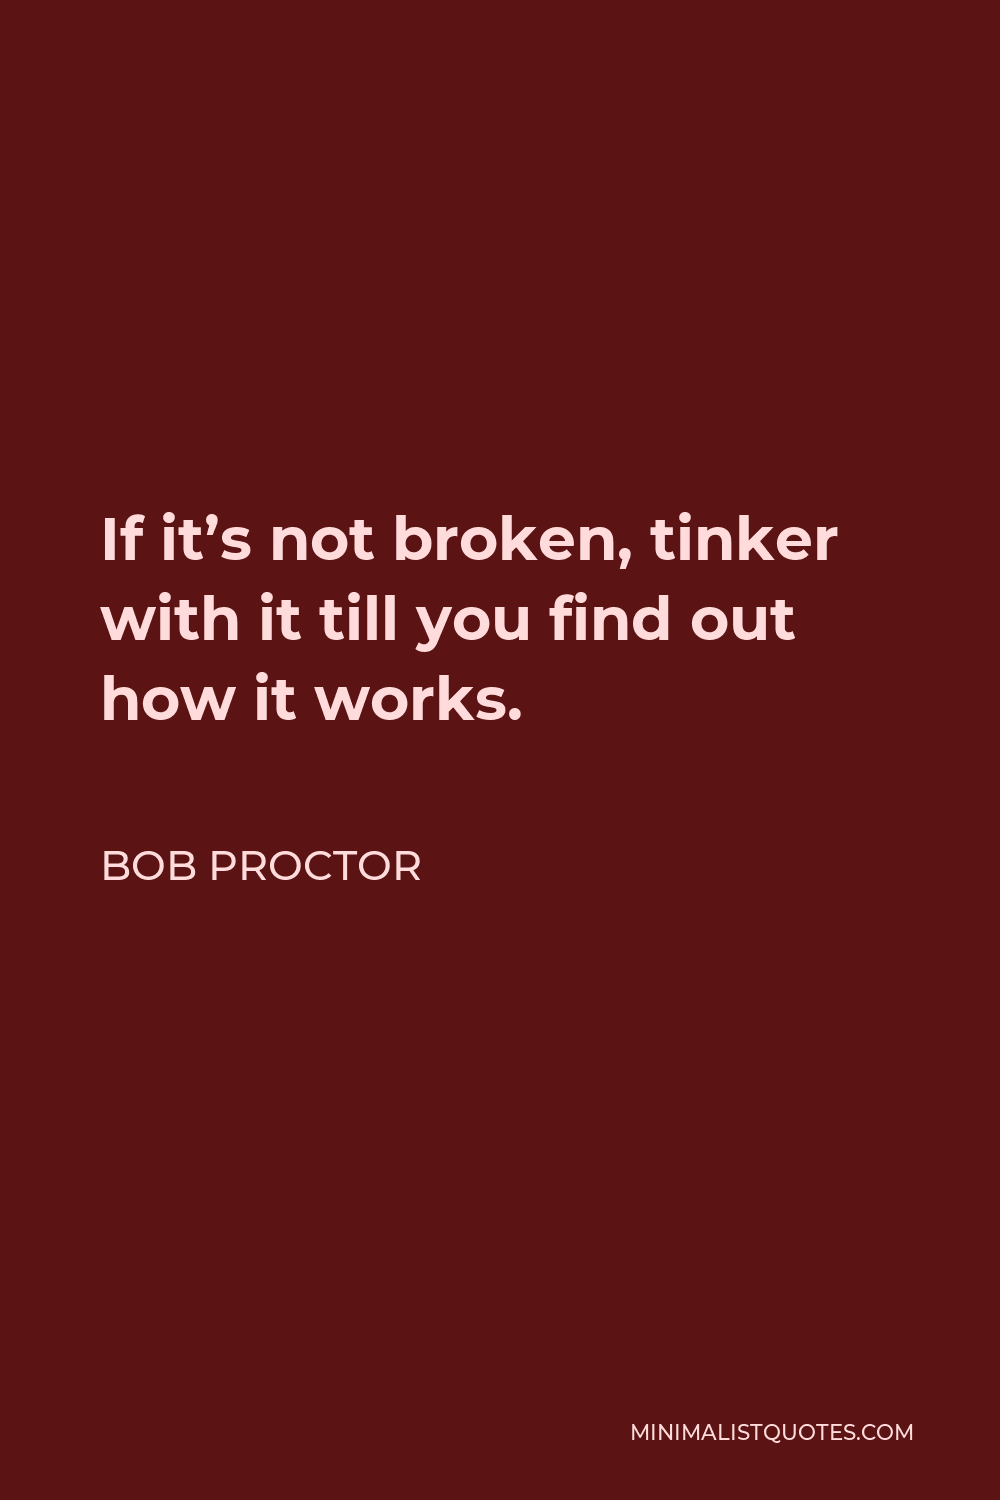 Bob Proctor Quote - If it’s not broken, tinker with it till you find out how it works.